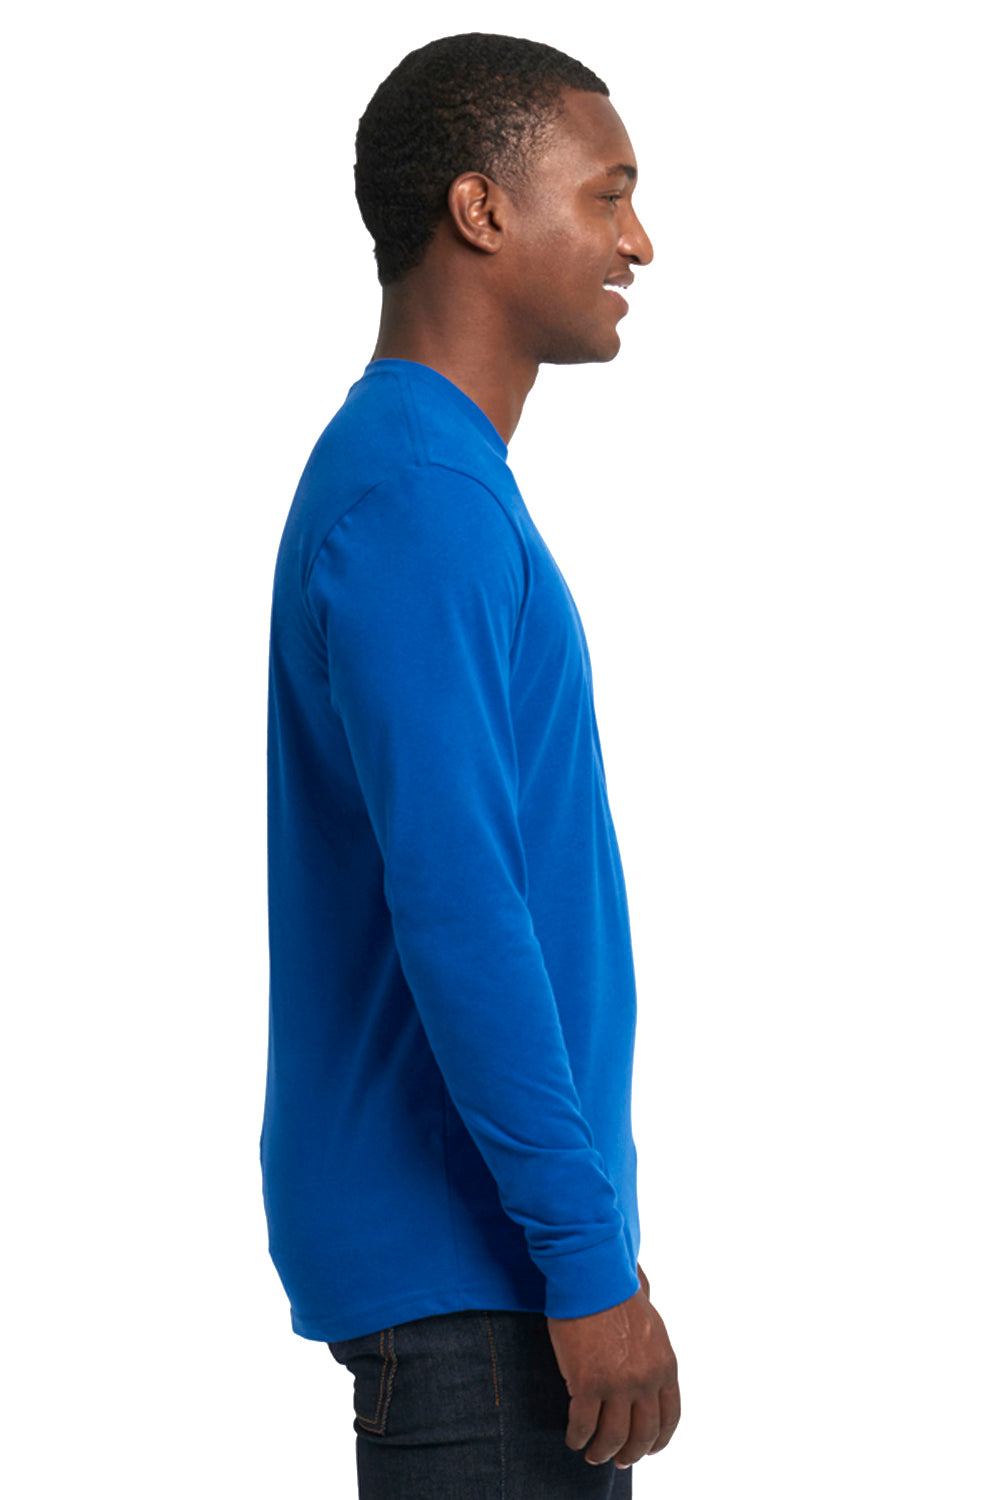 Next Level 6411 Sueded Jersey Long Sleeve Crewneck T-Shirt Royal Blue Side